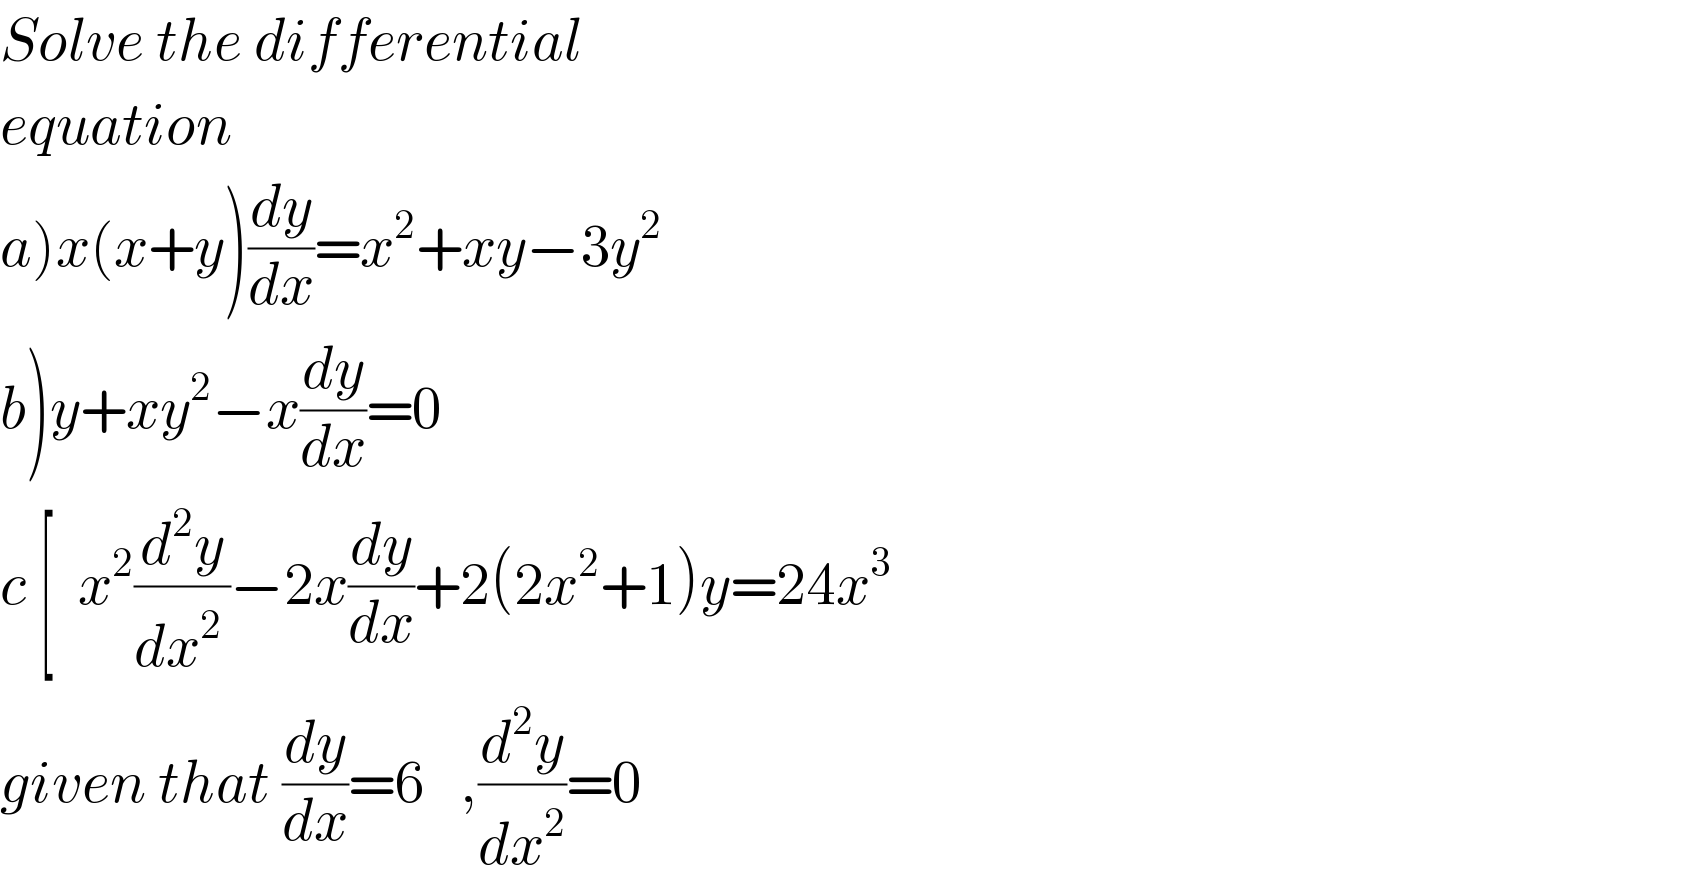 Solve the differential  equation  a)x(x+y)(dy/dx)=x^2 +xy−3y^2   b)y+xy^2 −x(dy/dx)=0  c [  x^2 (d^2 y/dx^(2 ) )−2x(dy/dx)+2(2x^2 +1)y=24x^3   given that (dy/dx)=6   ,(d^2 y/dx^2 )=0  